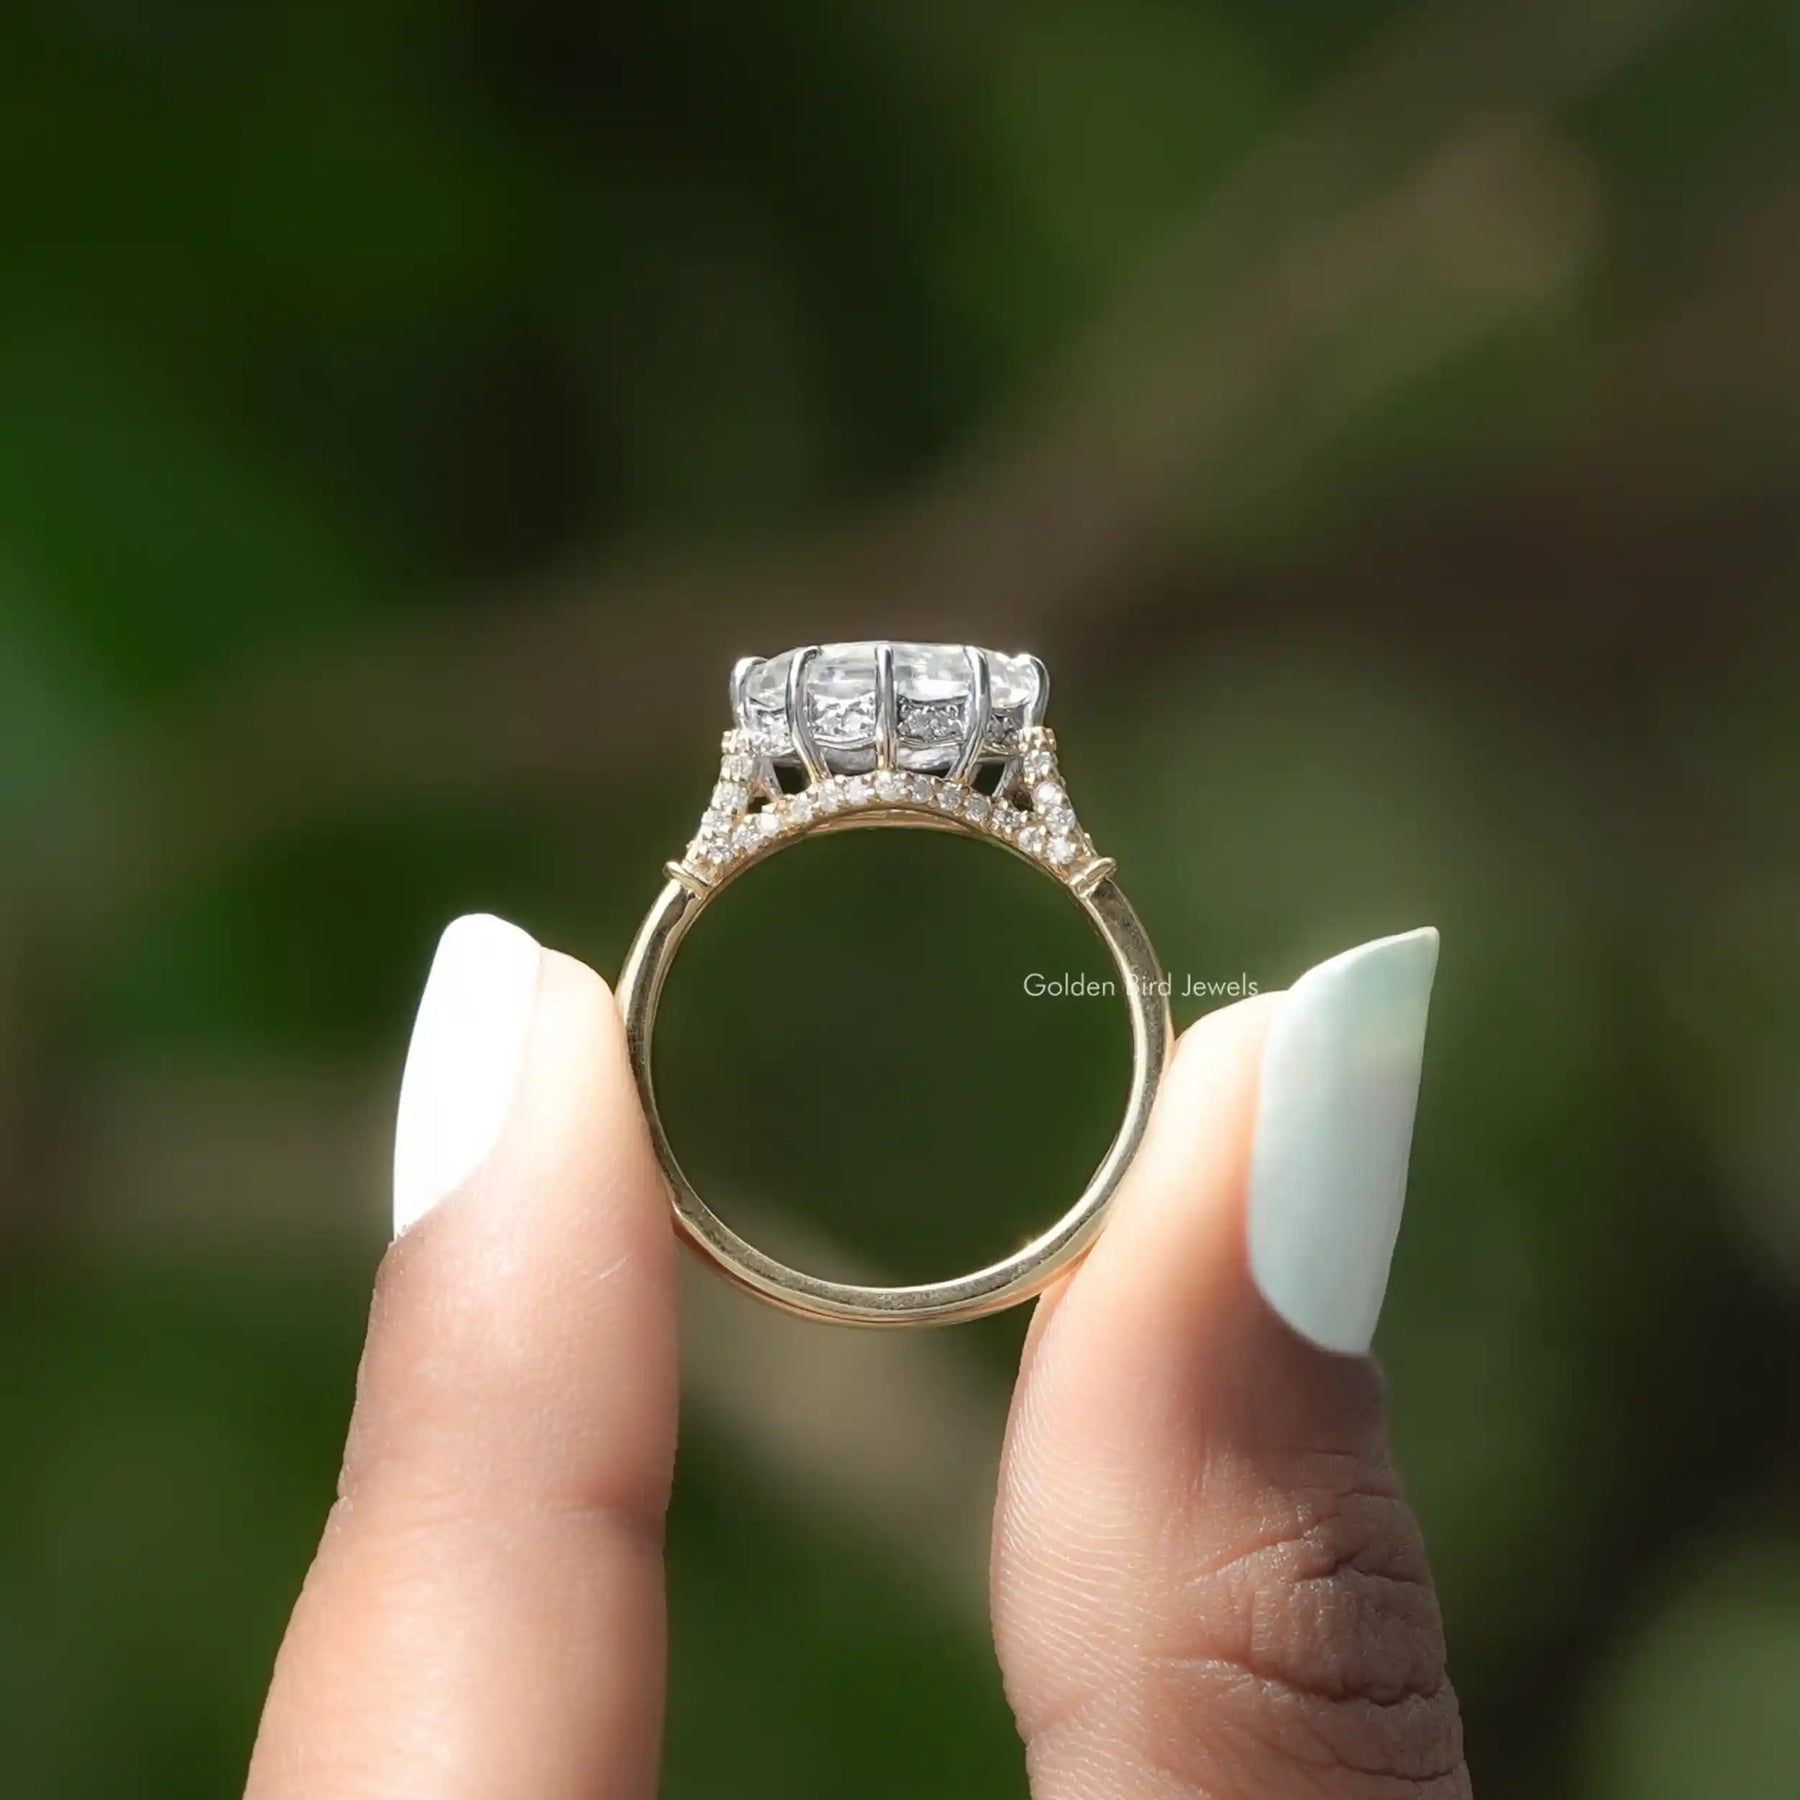 [Marquise cut moissanite ring made of prong setting]-[Golden Bird Jewels]